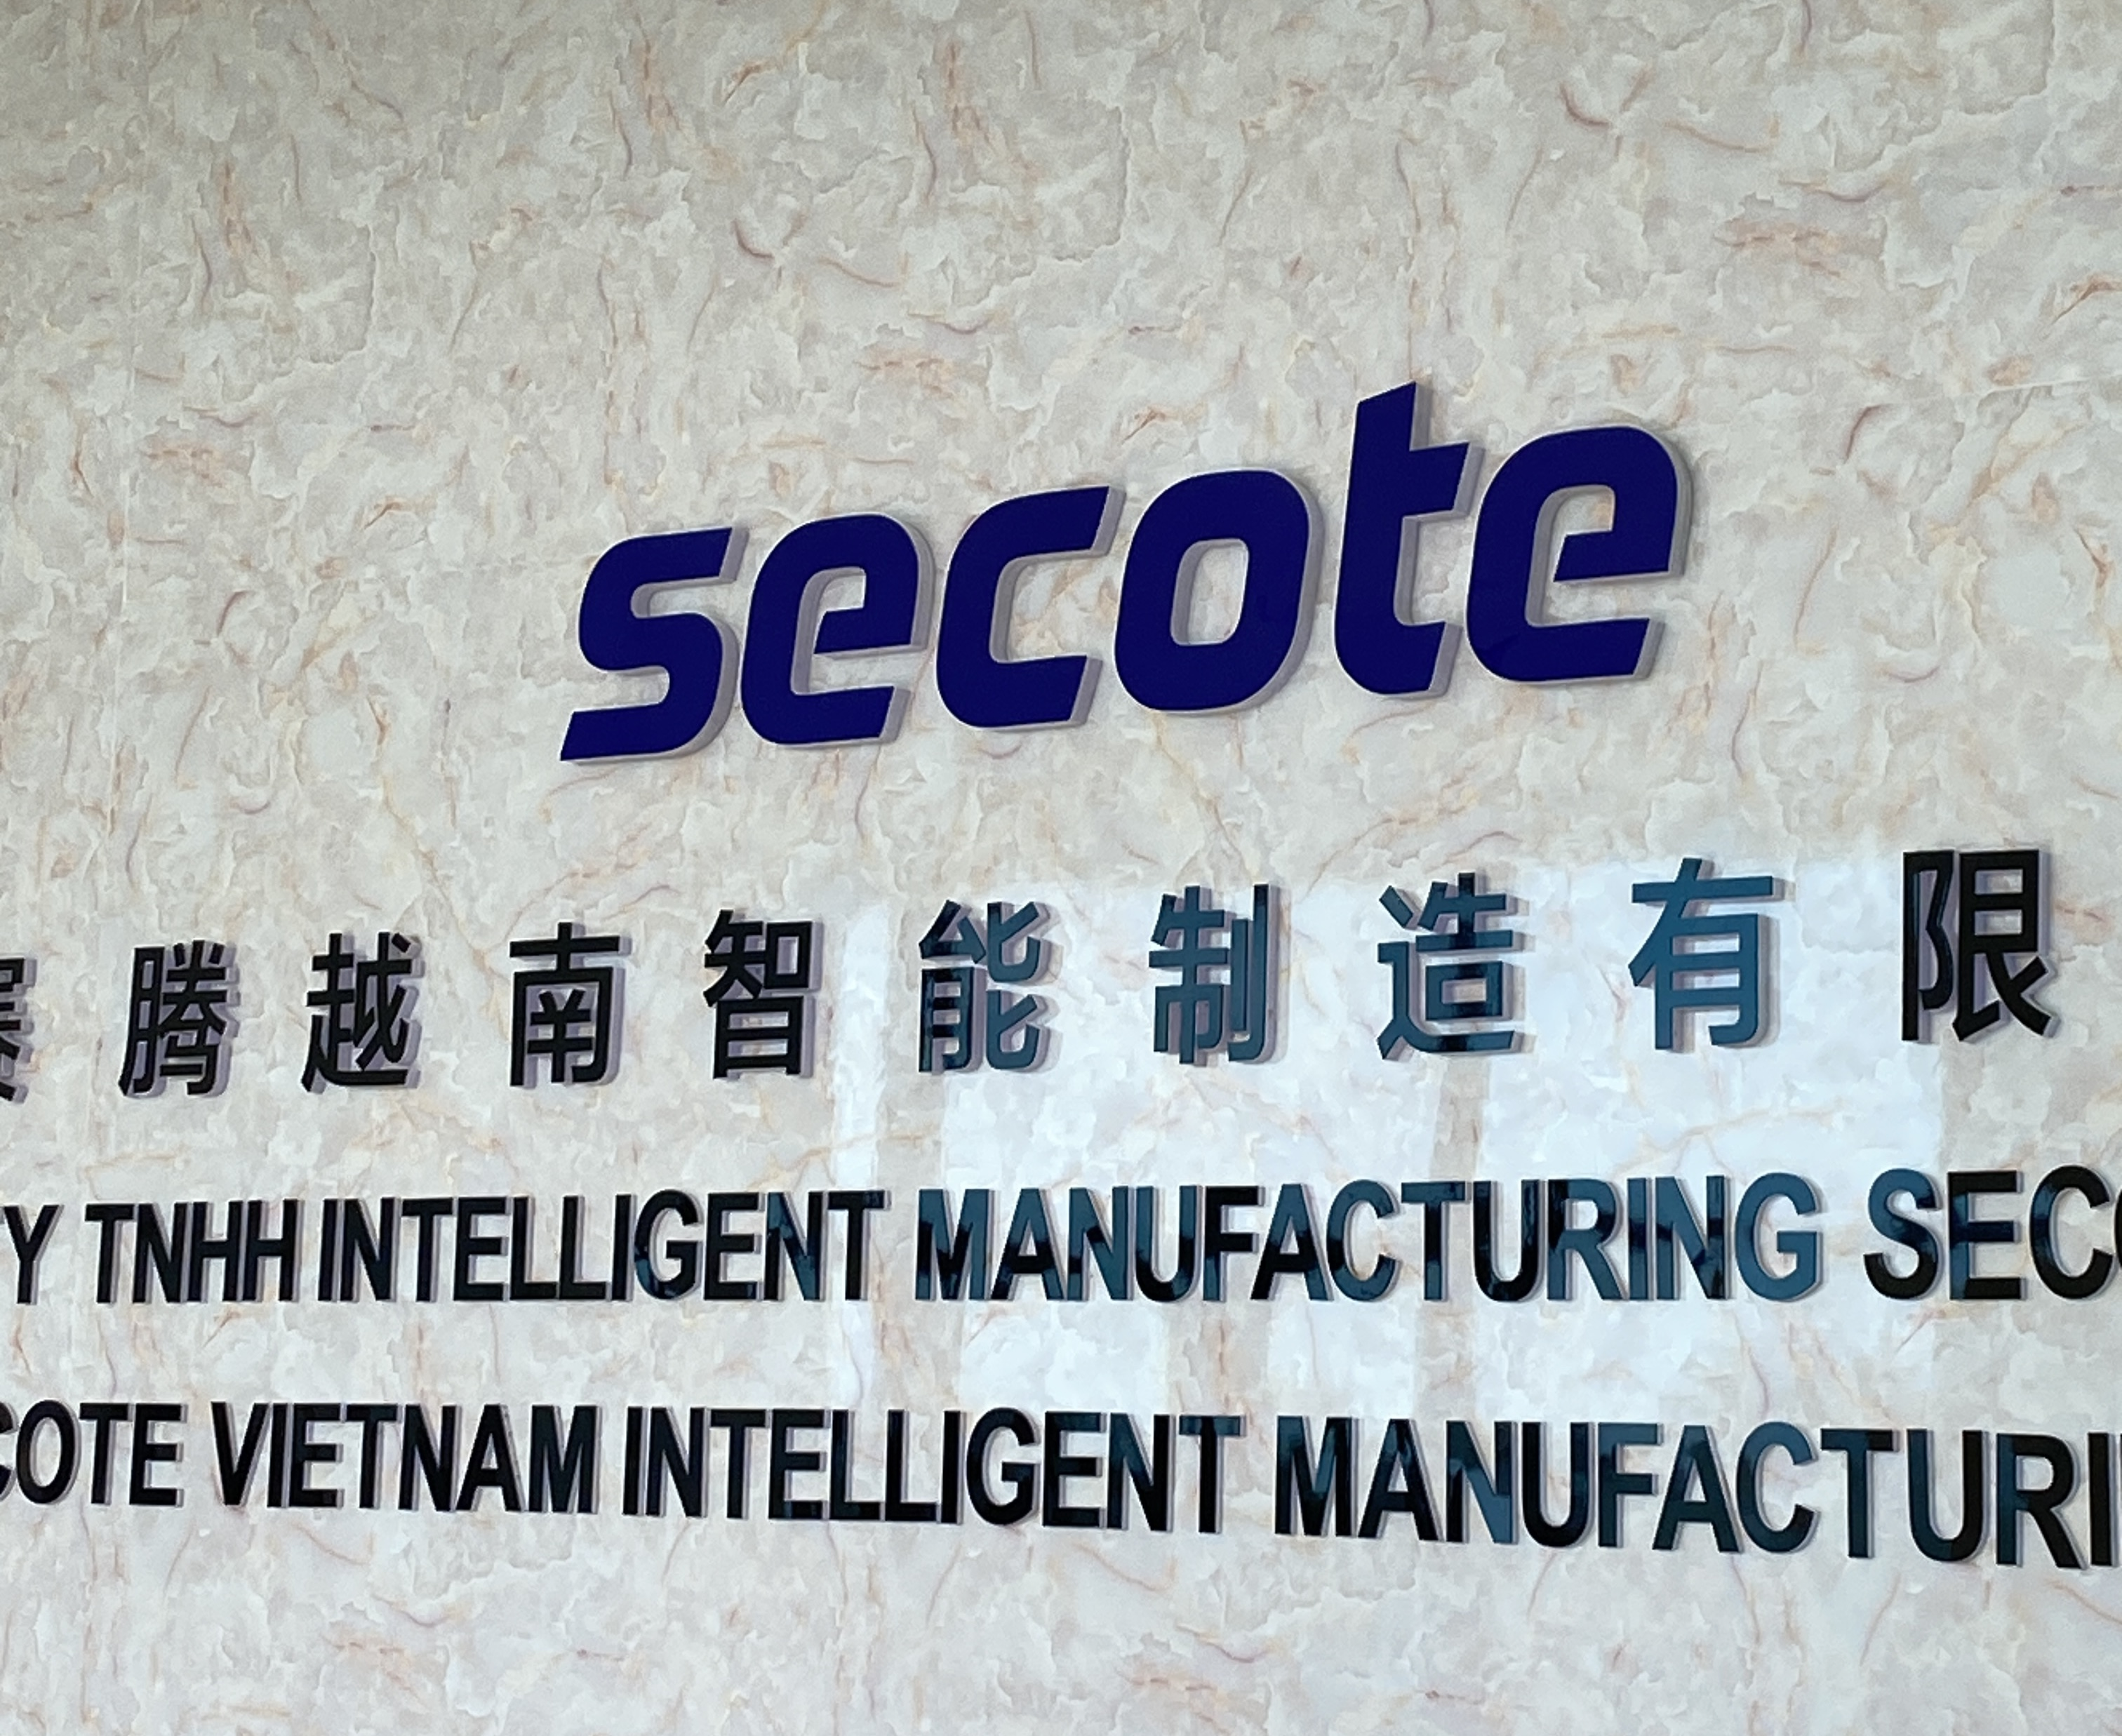 Cover image for INTELIGENT MANUFACTURING SECOTE VIỆT NAM